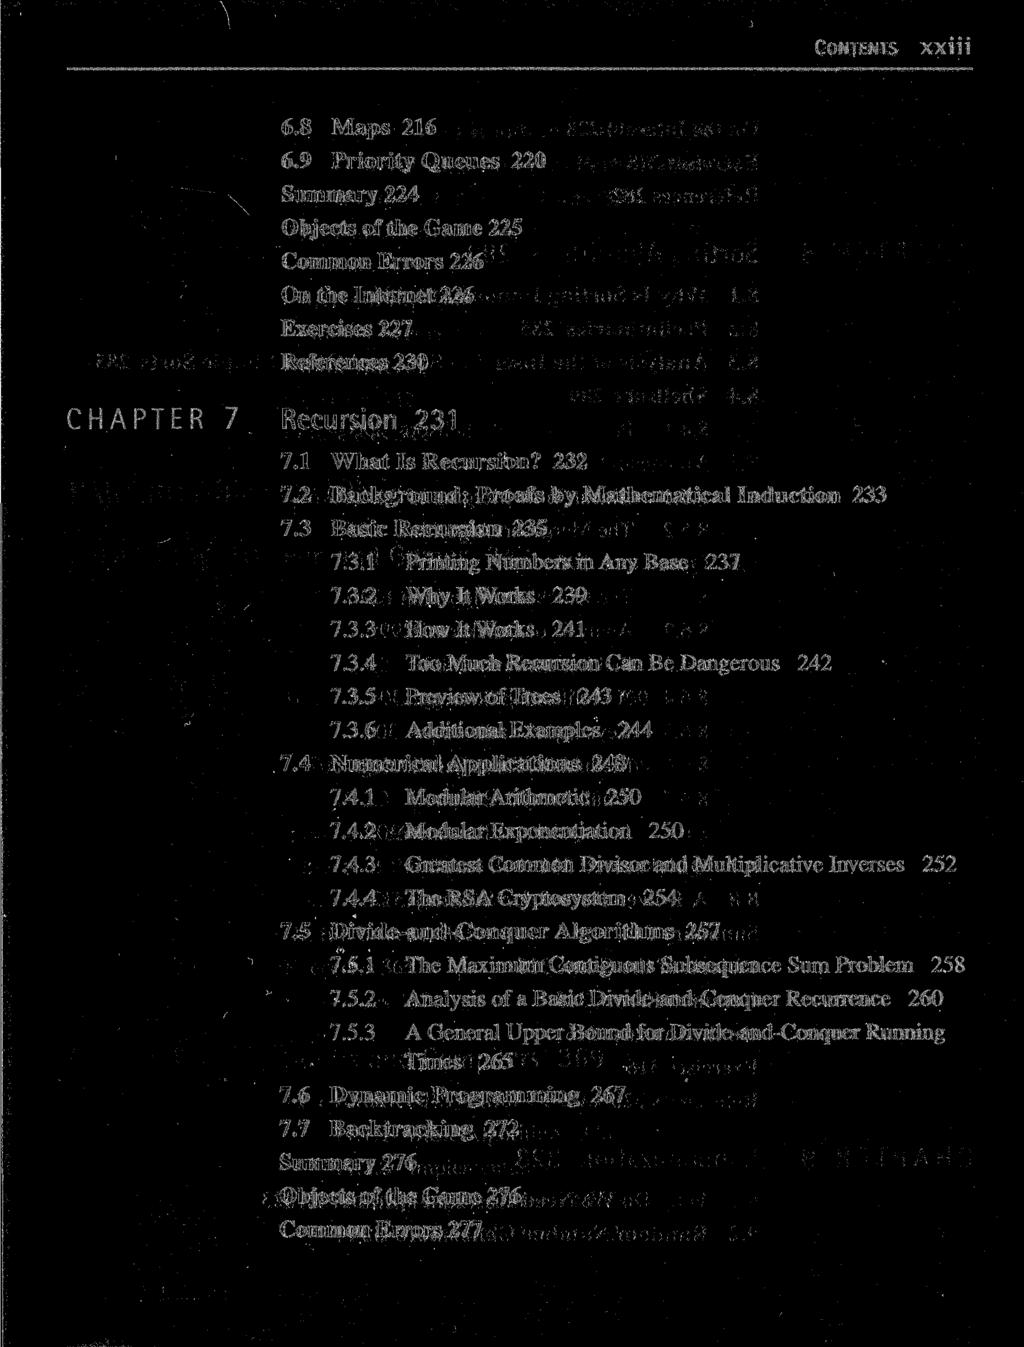 CONTENTS xxiii 6.8 Maps 216 6.9 Priority Queues 220 Summary 224 Objects of the Game 225 Common Errors 226 On the Internet 226 Exercises 227 References 230 CHAPTER 7 Recursion 231 f 7.